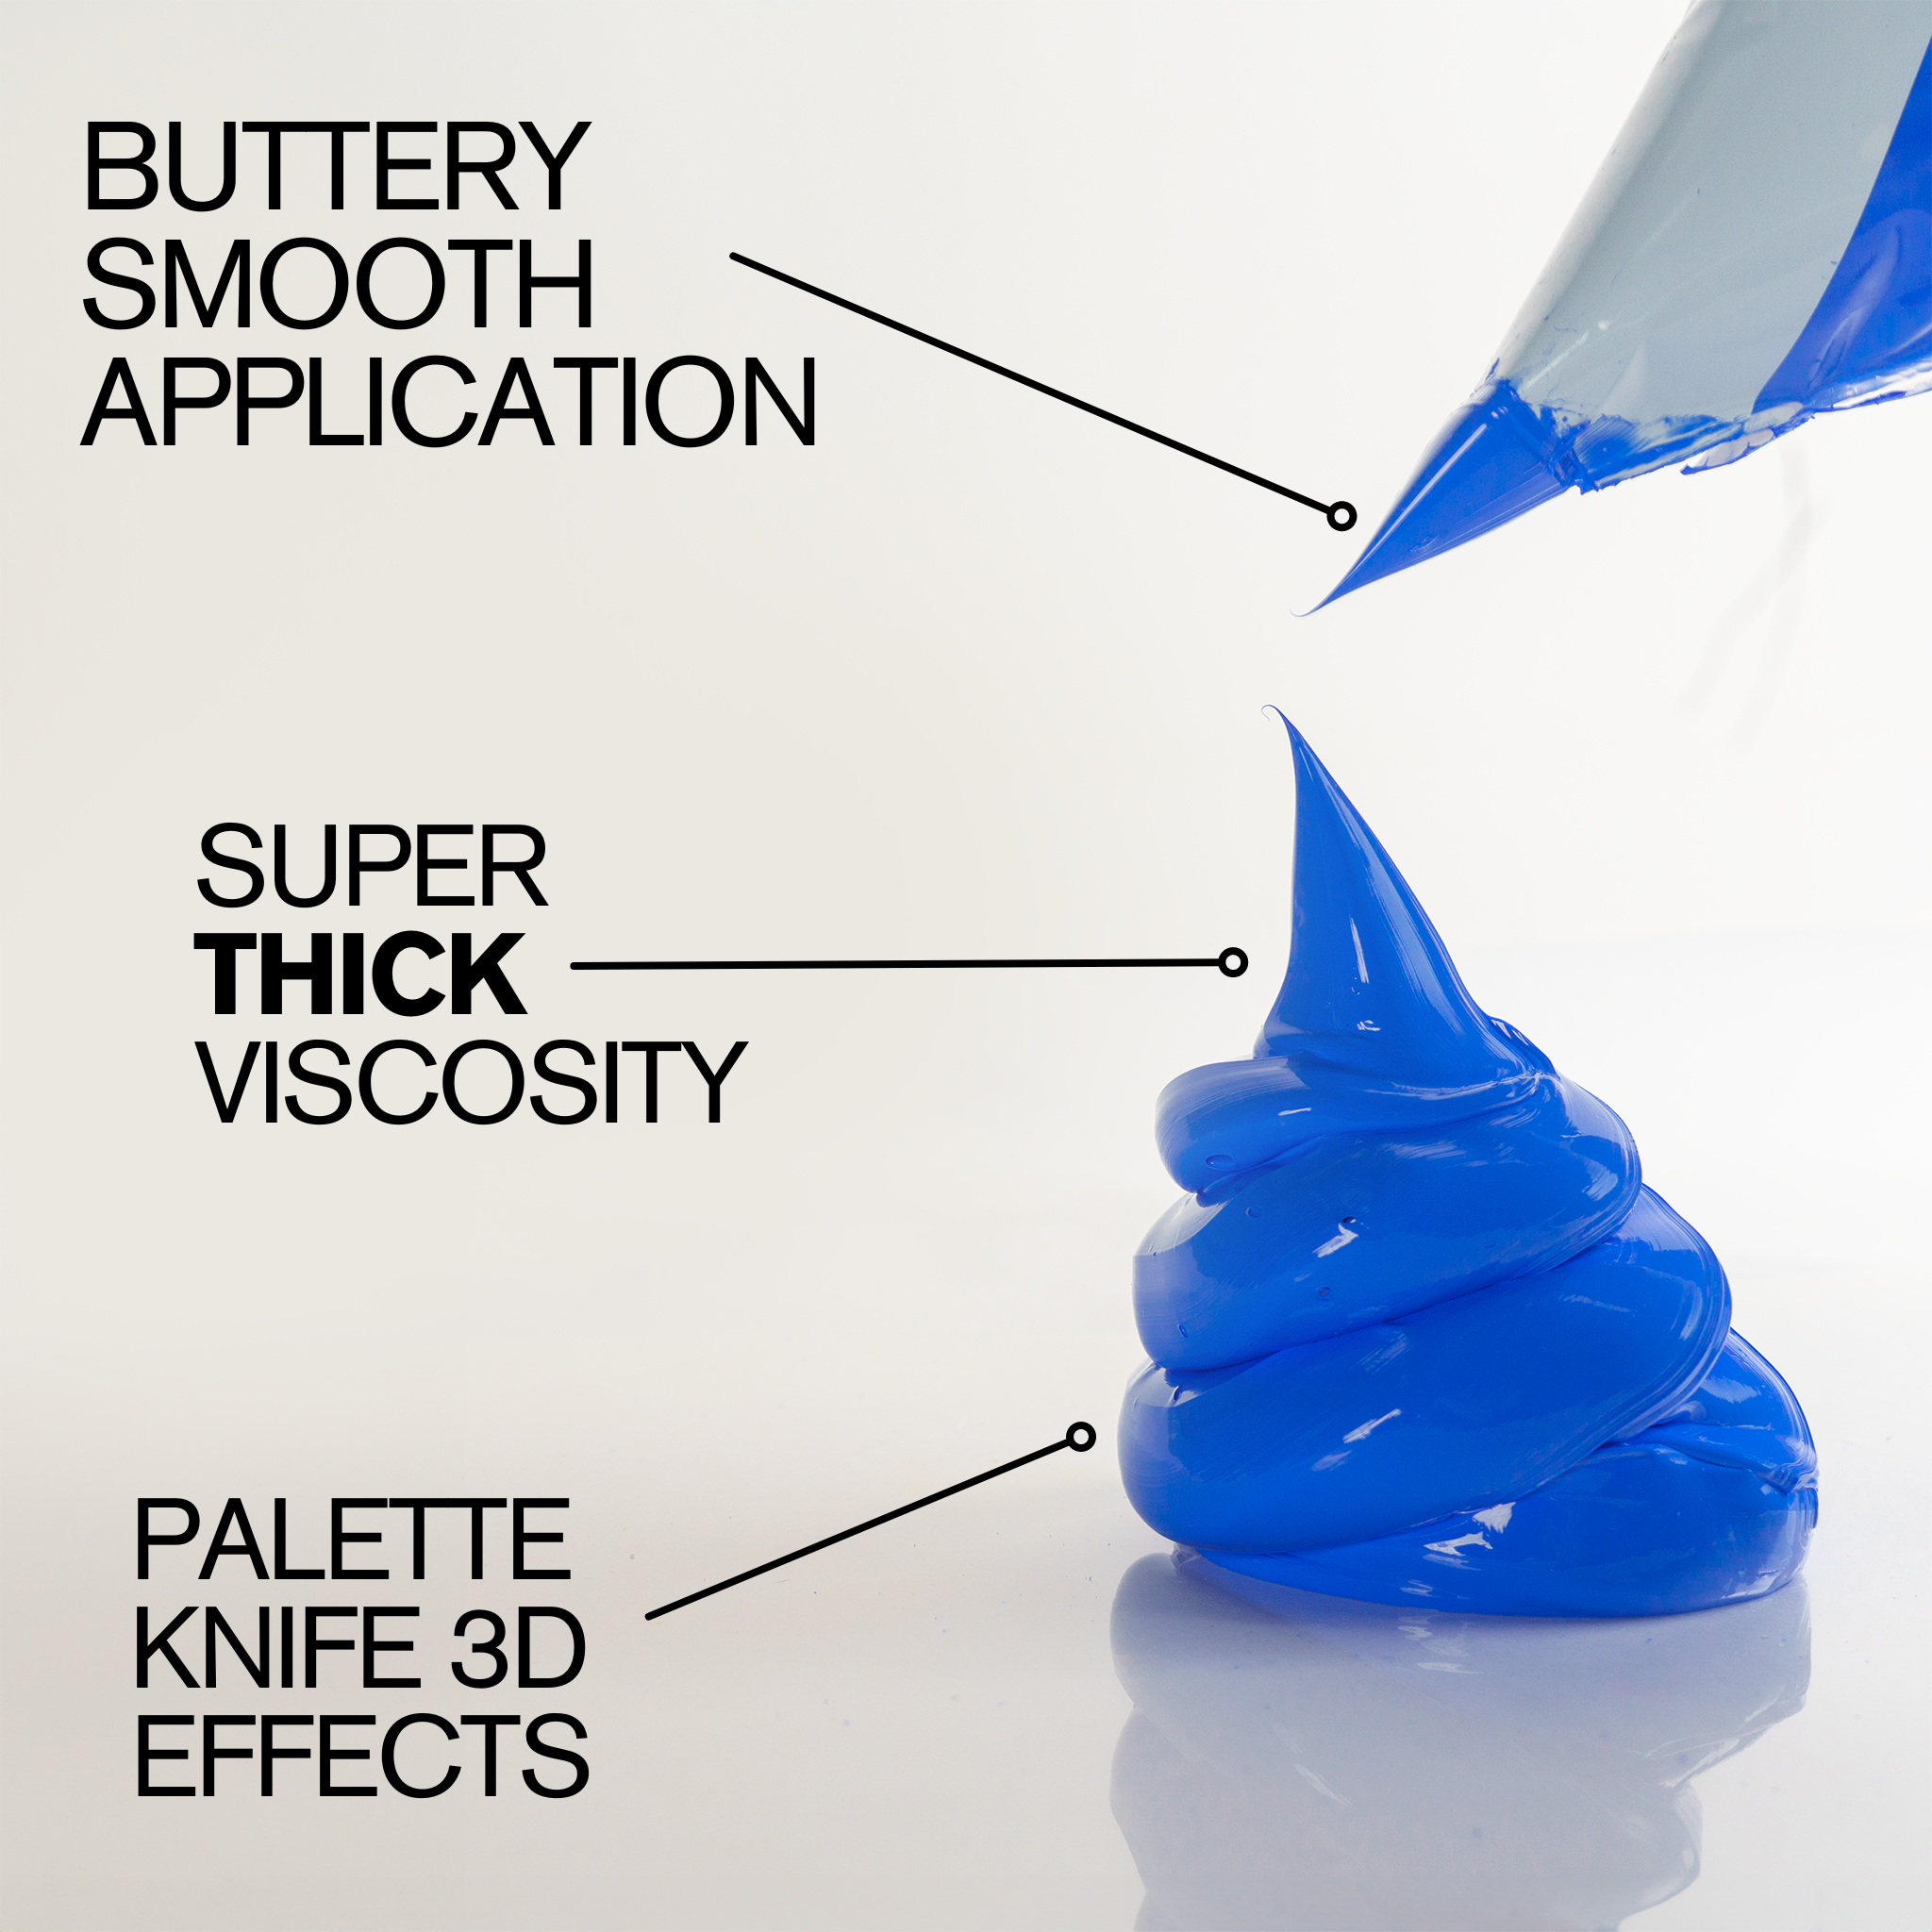 Blue acrylic paint extruded onto a surface, illustrating its high viscosity and potential for palette knife techniques